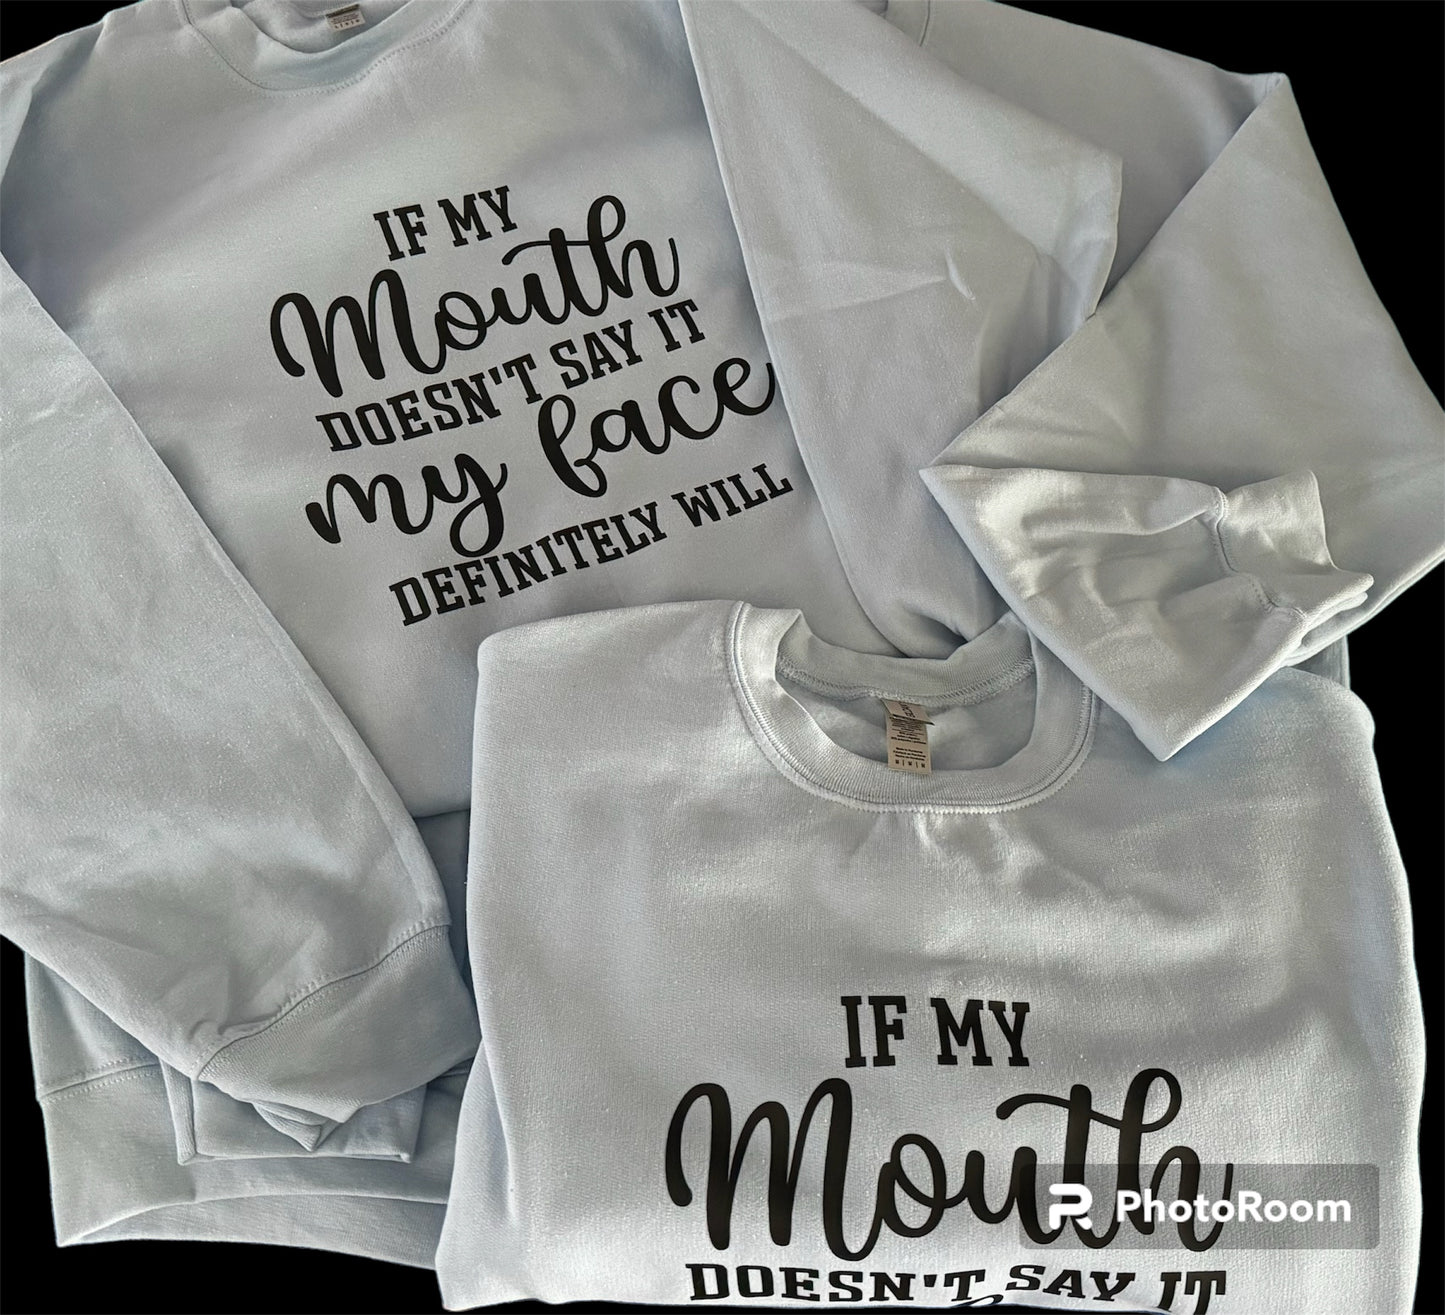 "If My Mouth Doesn't Say It" Baby Blue Crewneck Sweatshirt